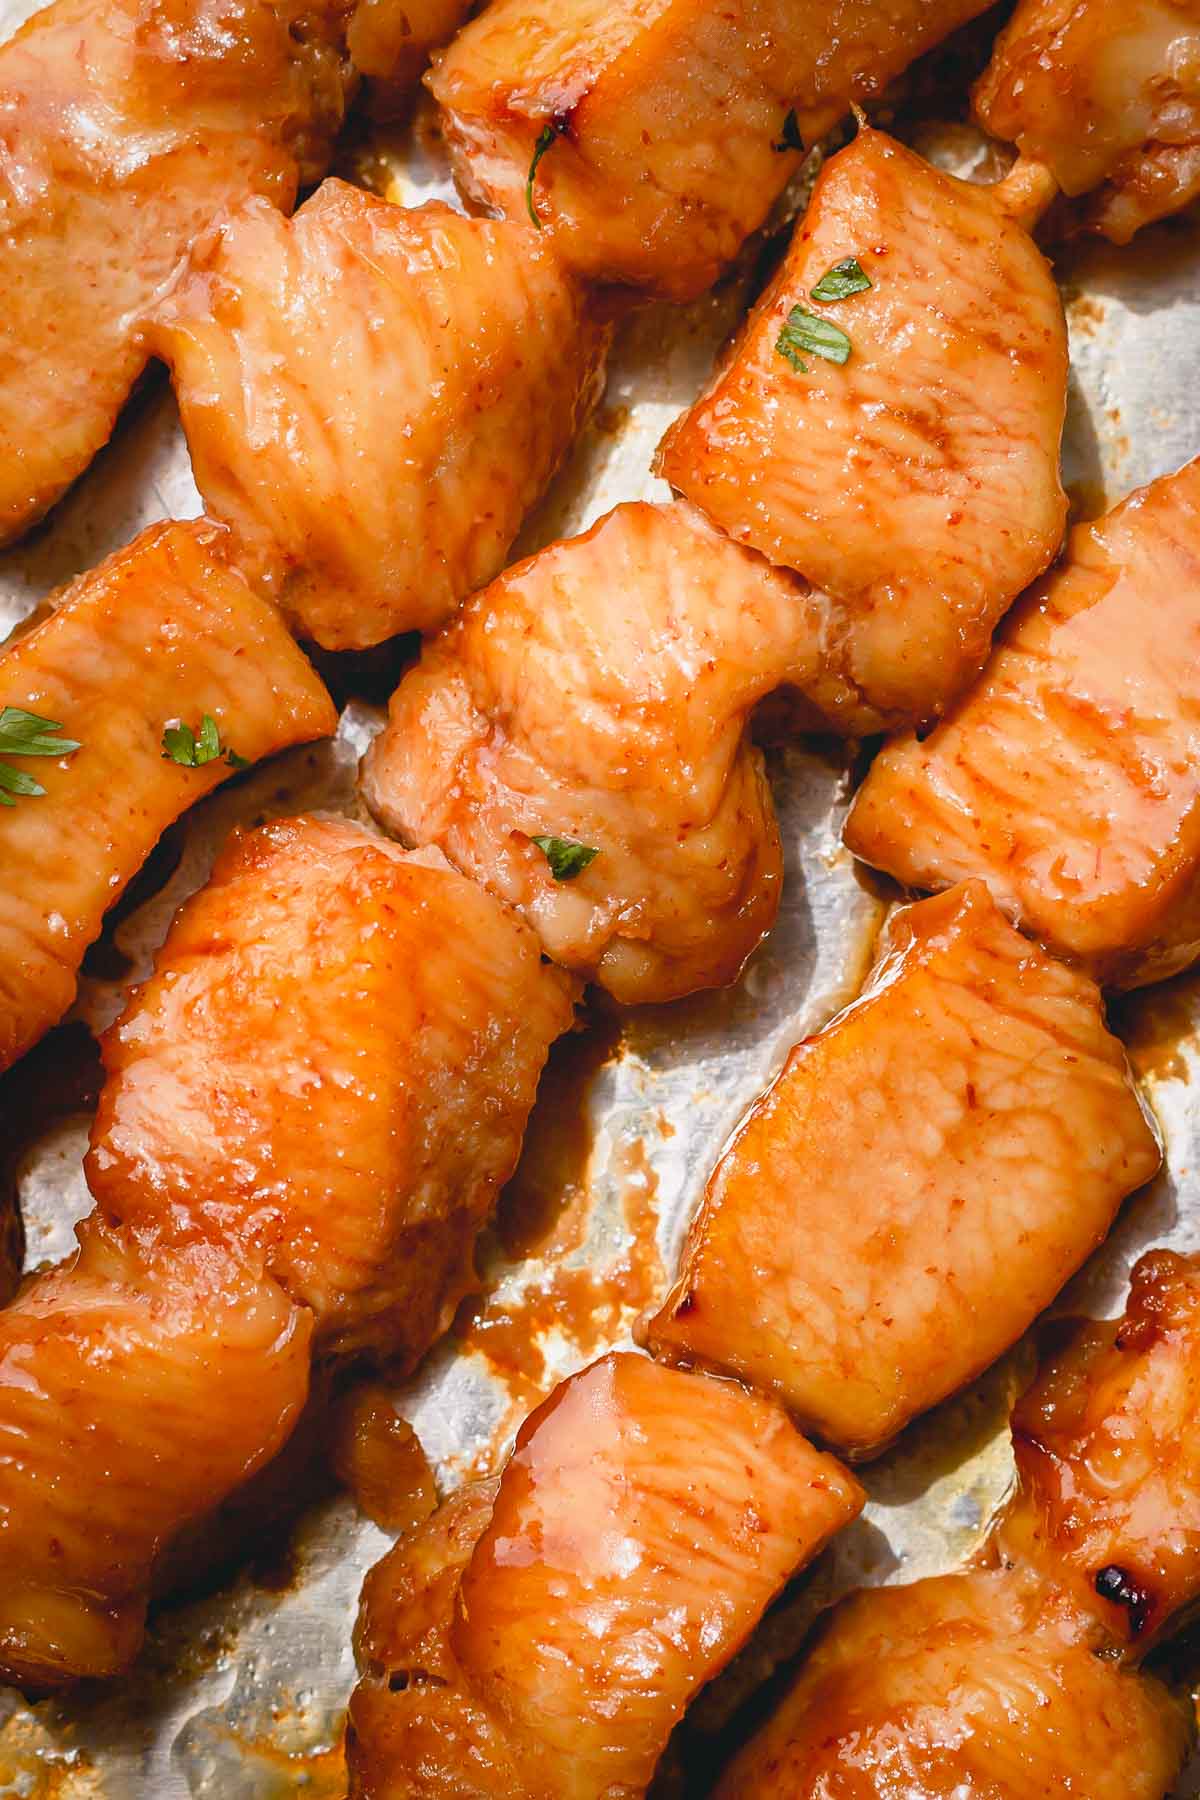 Cooked chicken skewers on a baking sheet.